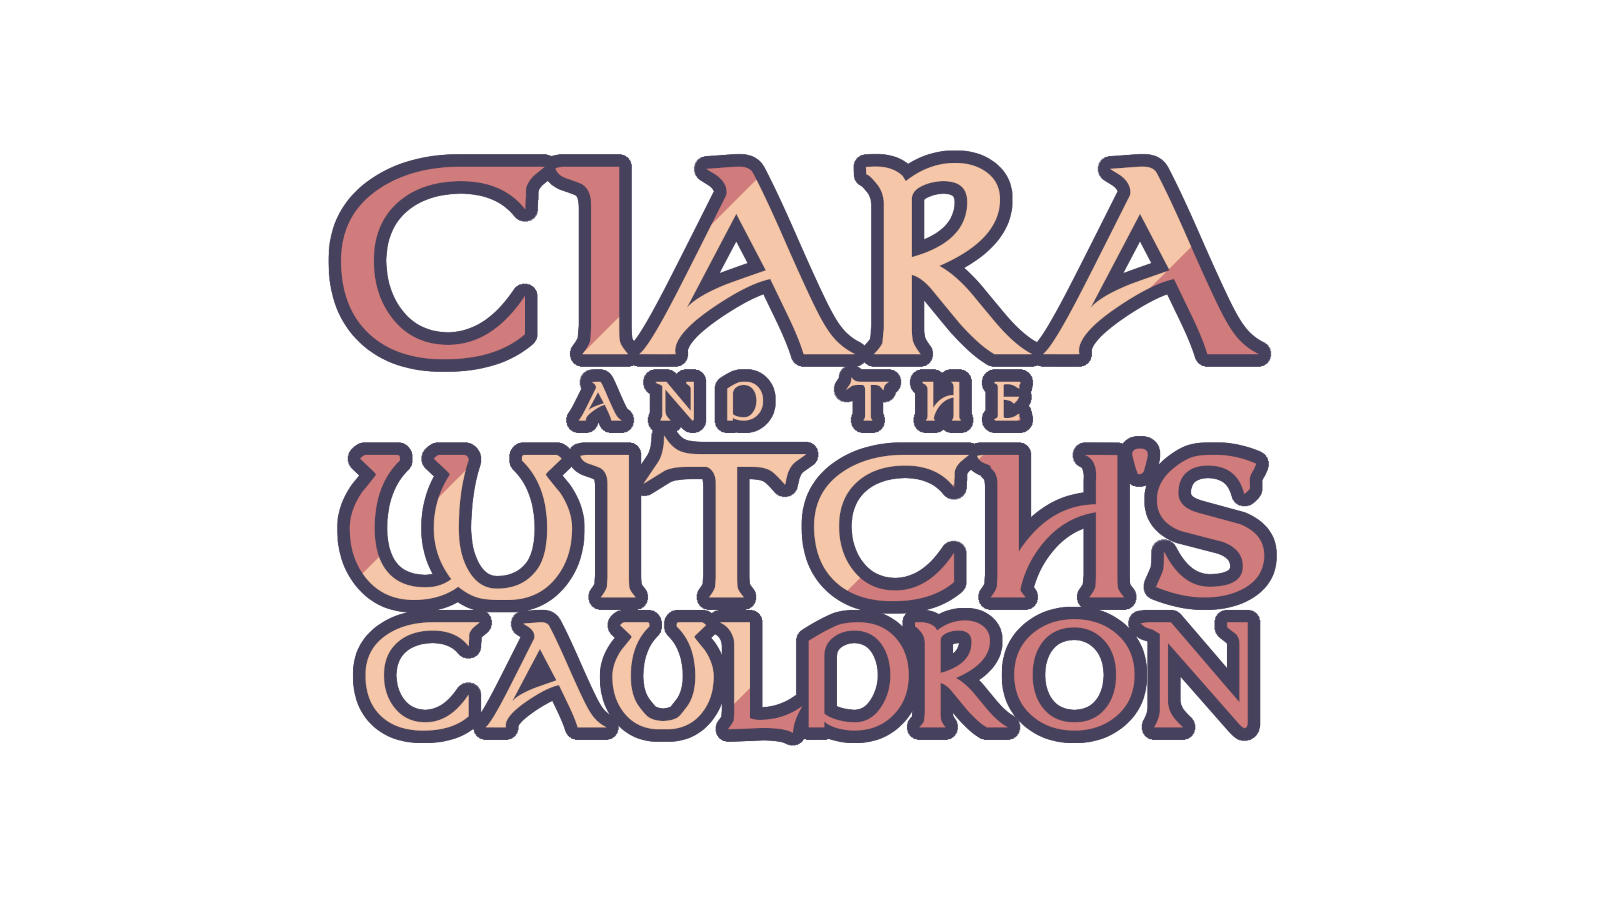 Ciara and the Witch's Cauldron